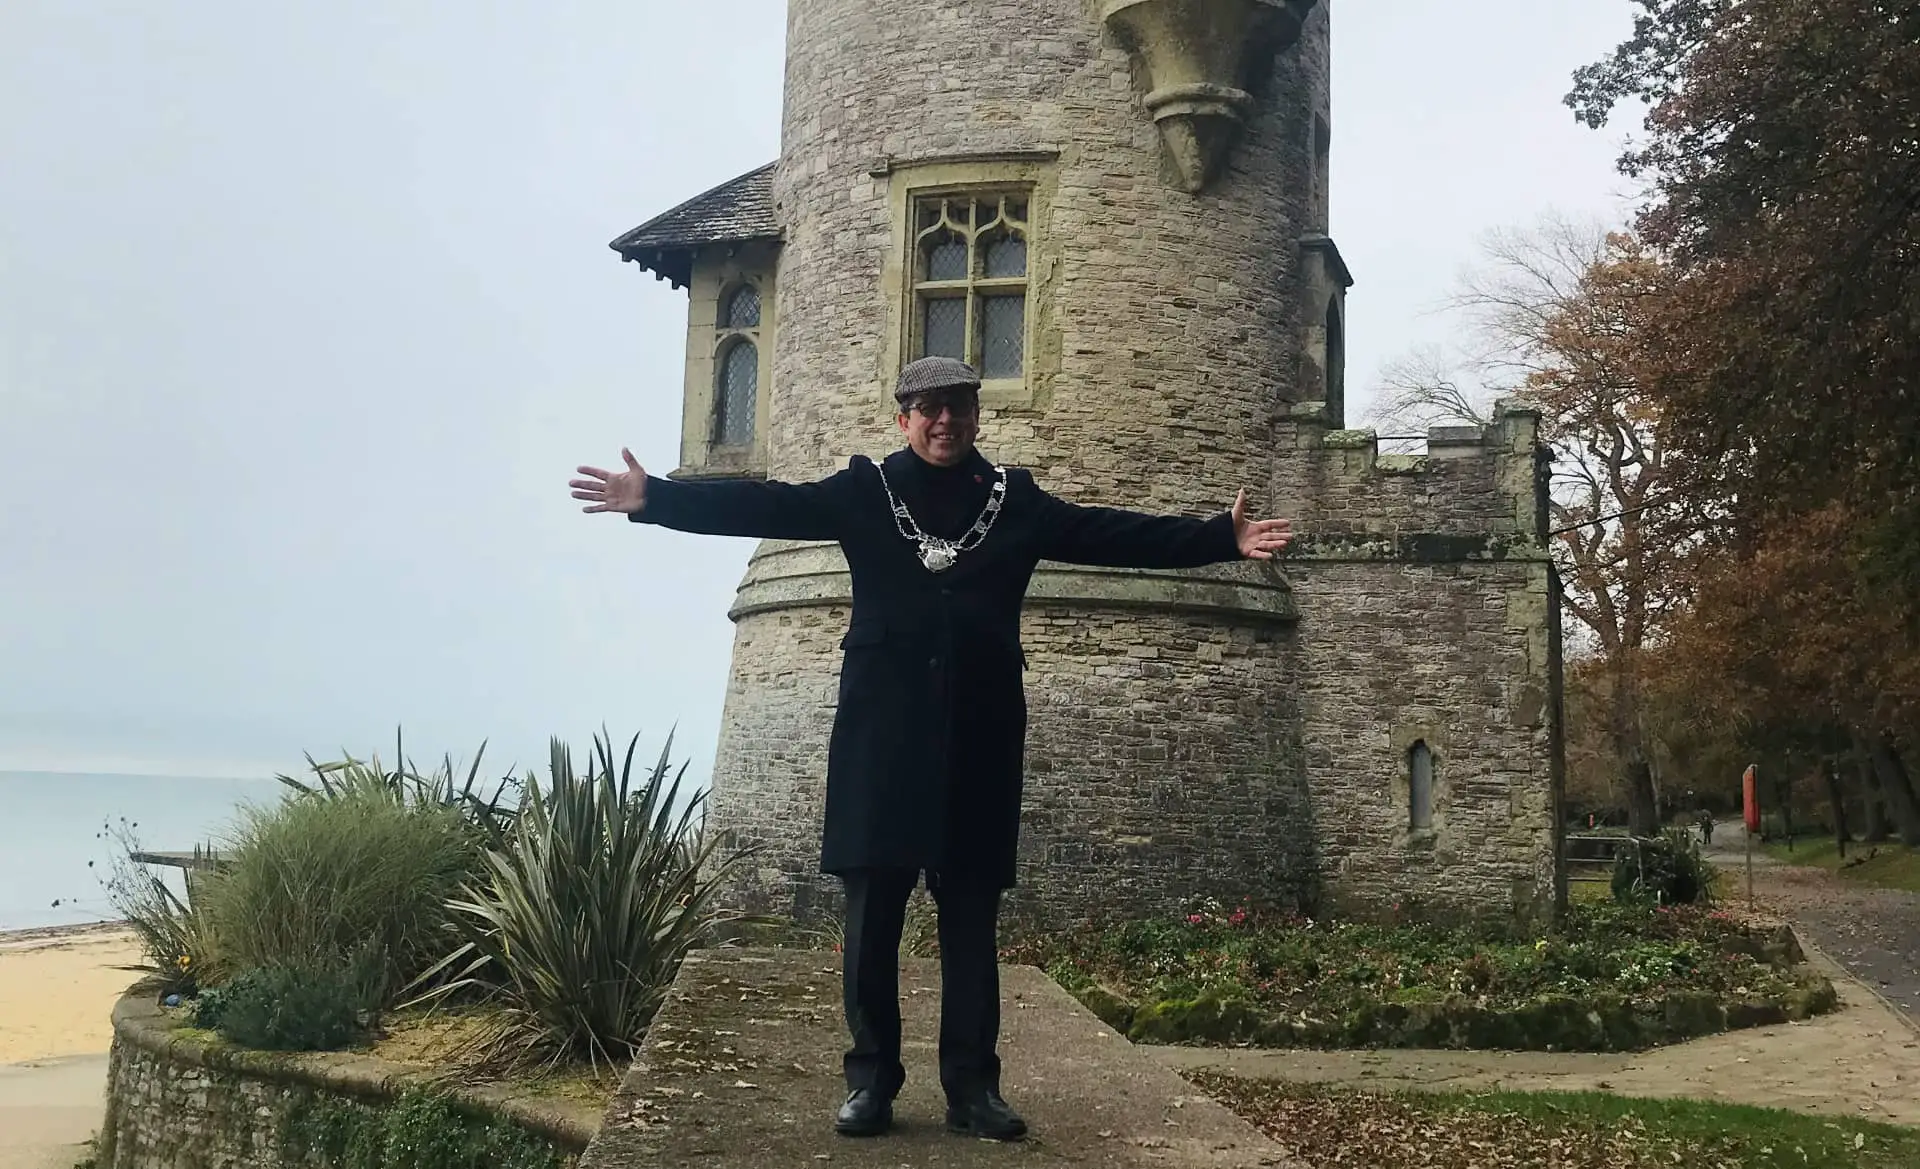 he Mayor - Cllr Michael Lilley by Appley Tower